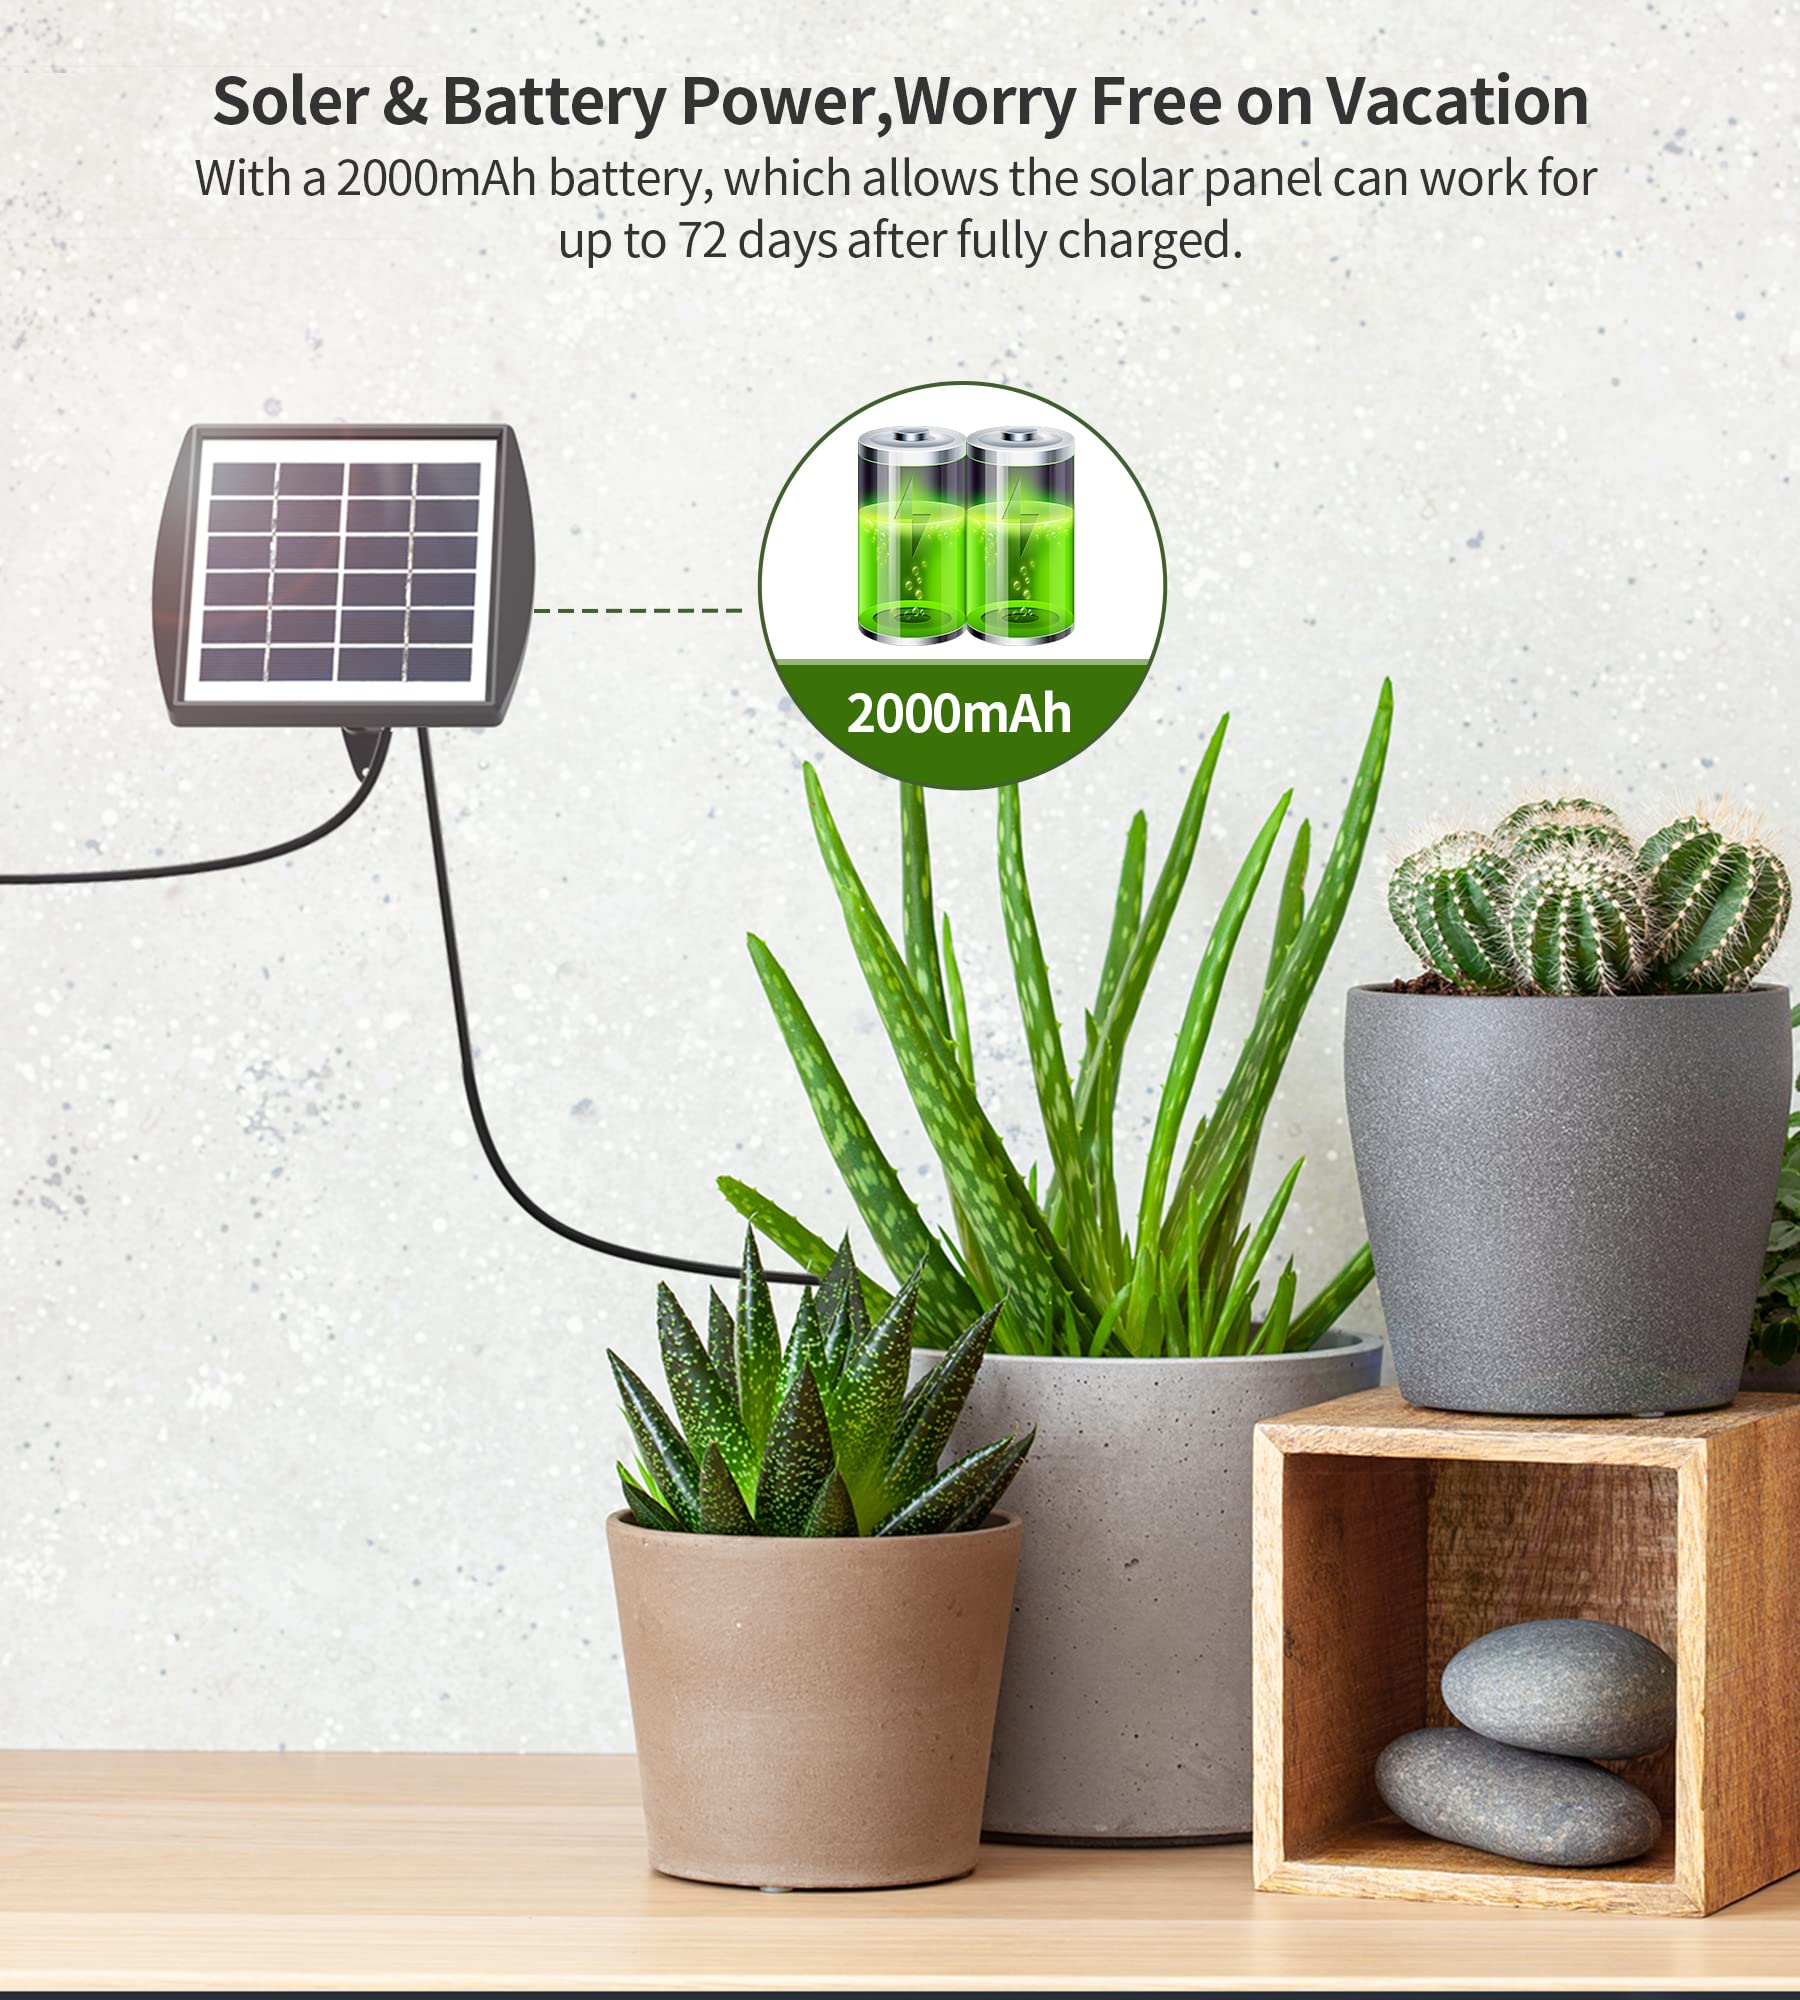 Solar Drip Automatic Watering System for Potted Plants 49.9FT